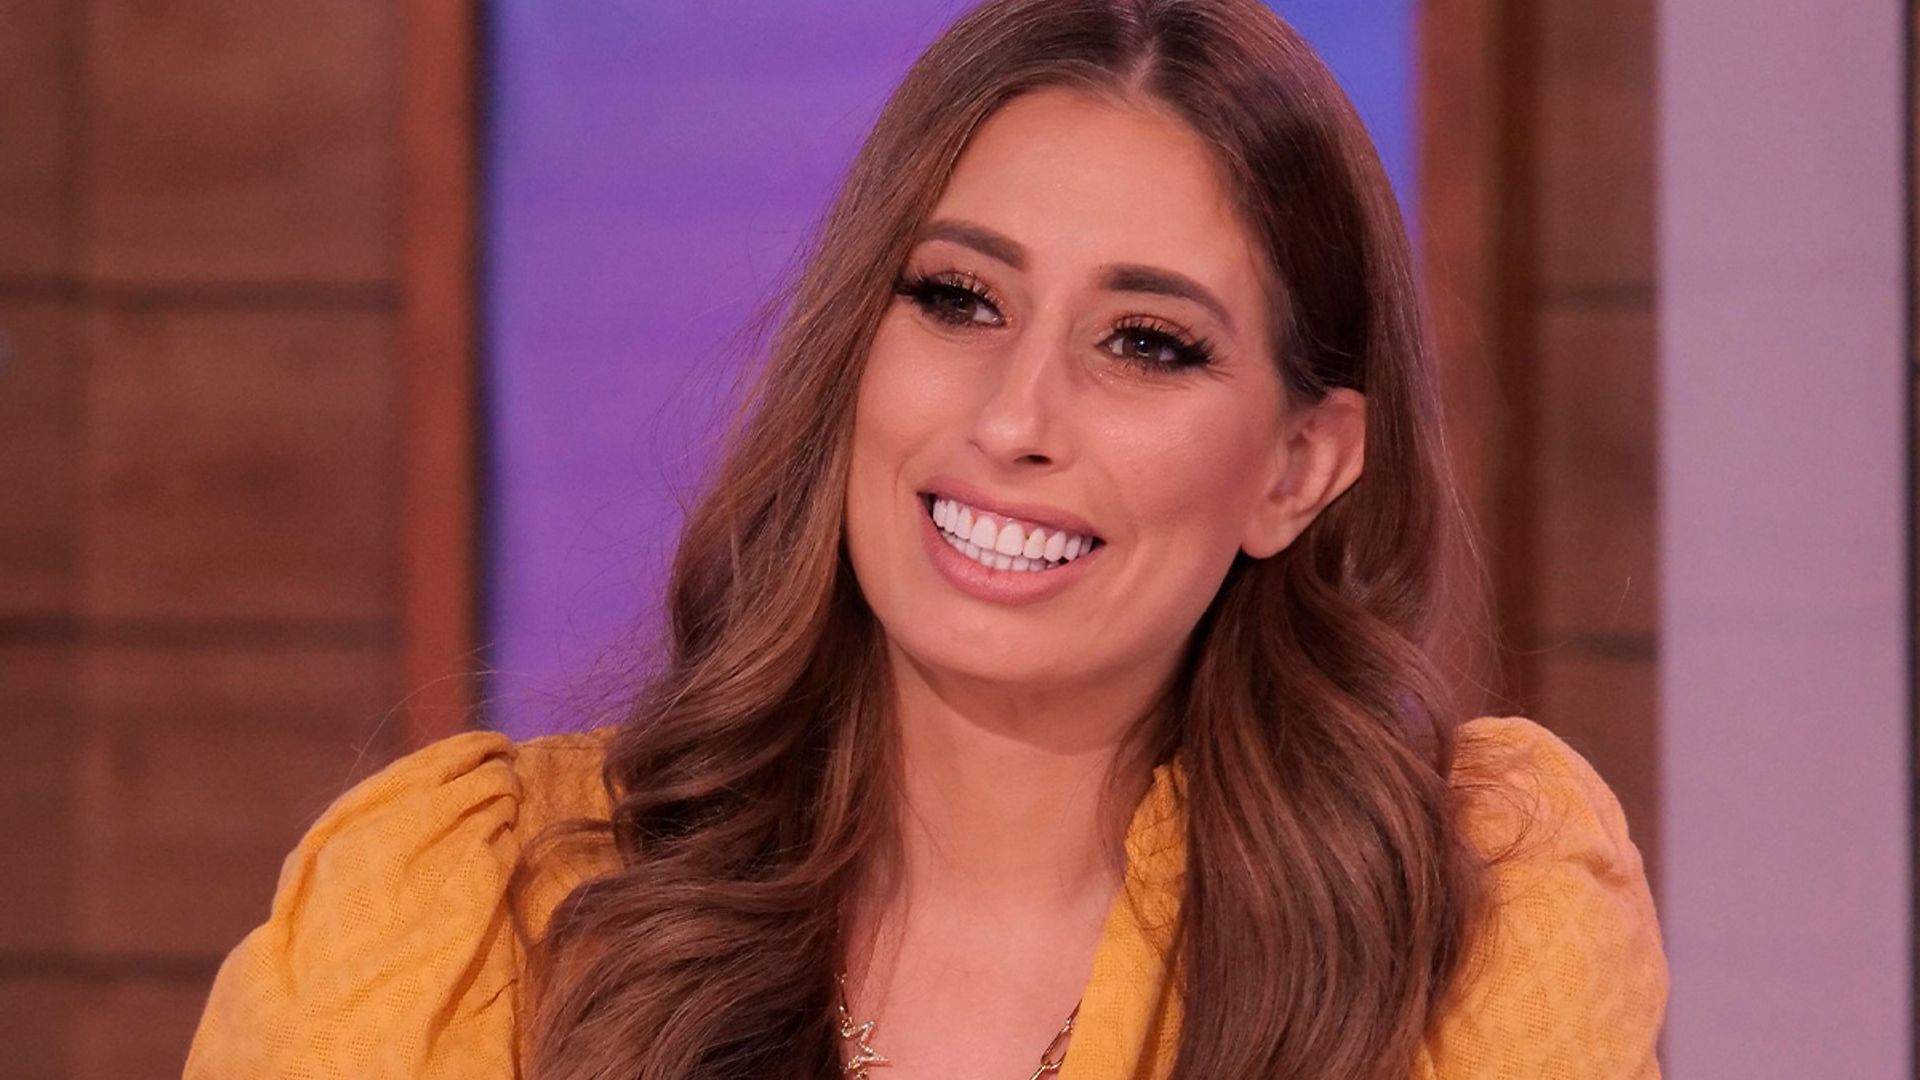 stacey solomon painting wall